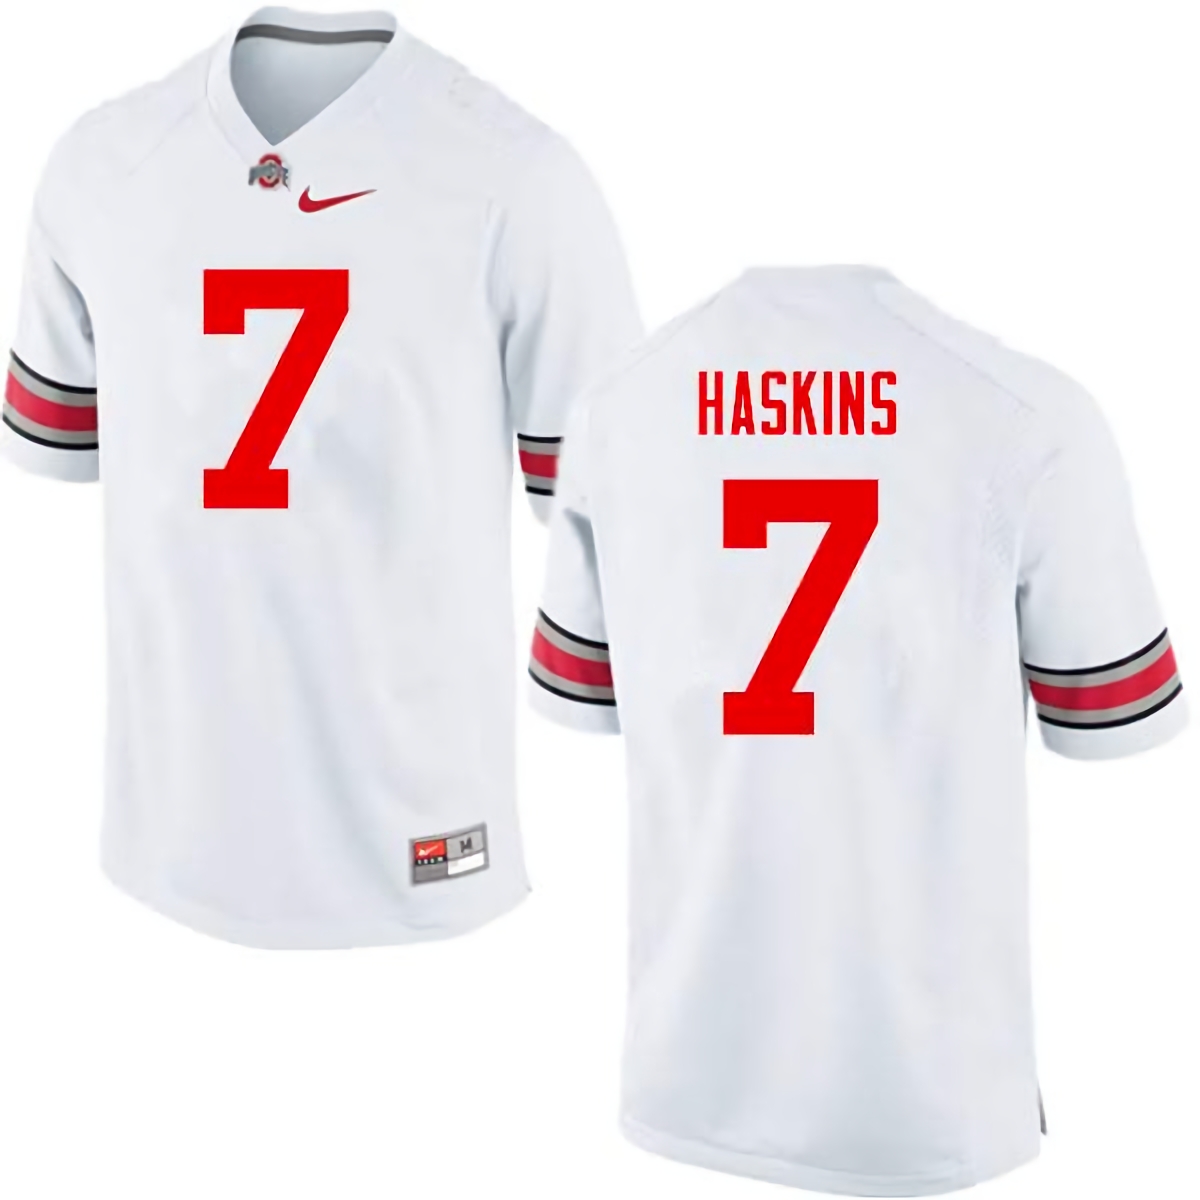 Dwayne Haskins Ohio State Buckeyes Men's NCAA #7 Nike White College Stitched Football Jersey RPM8156SI